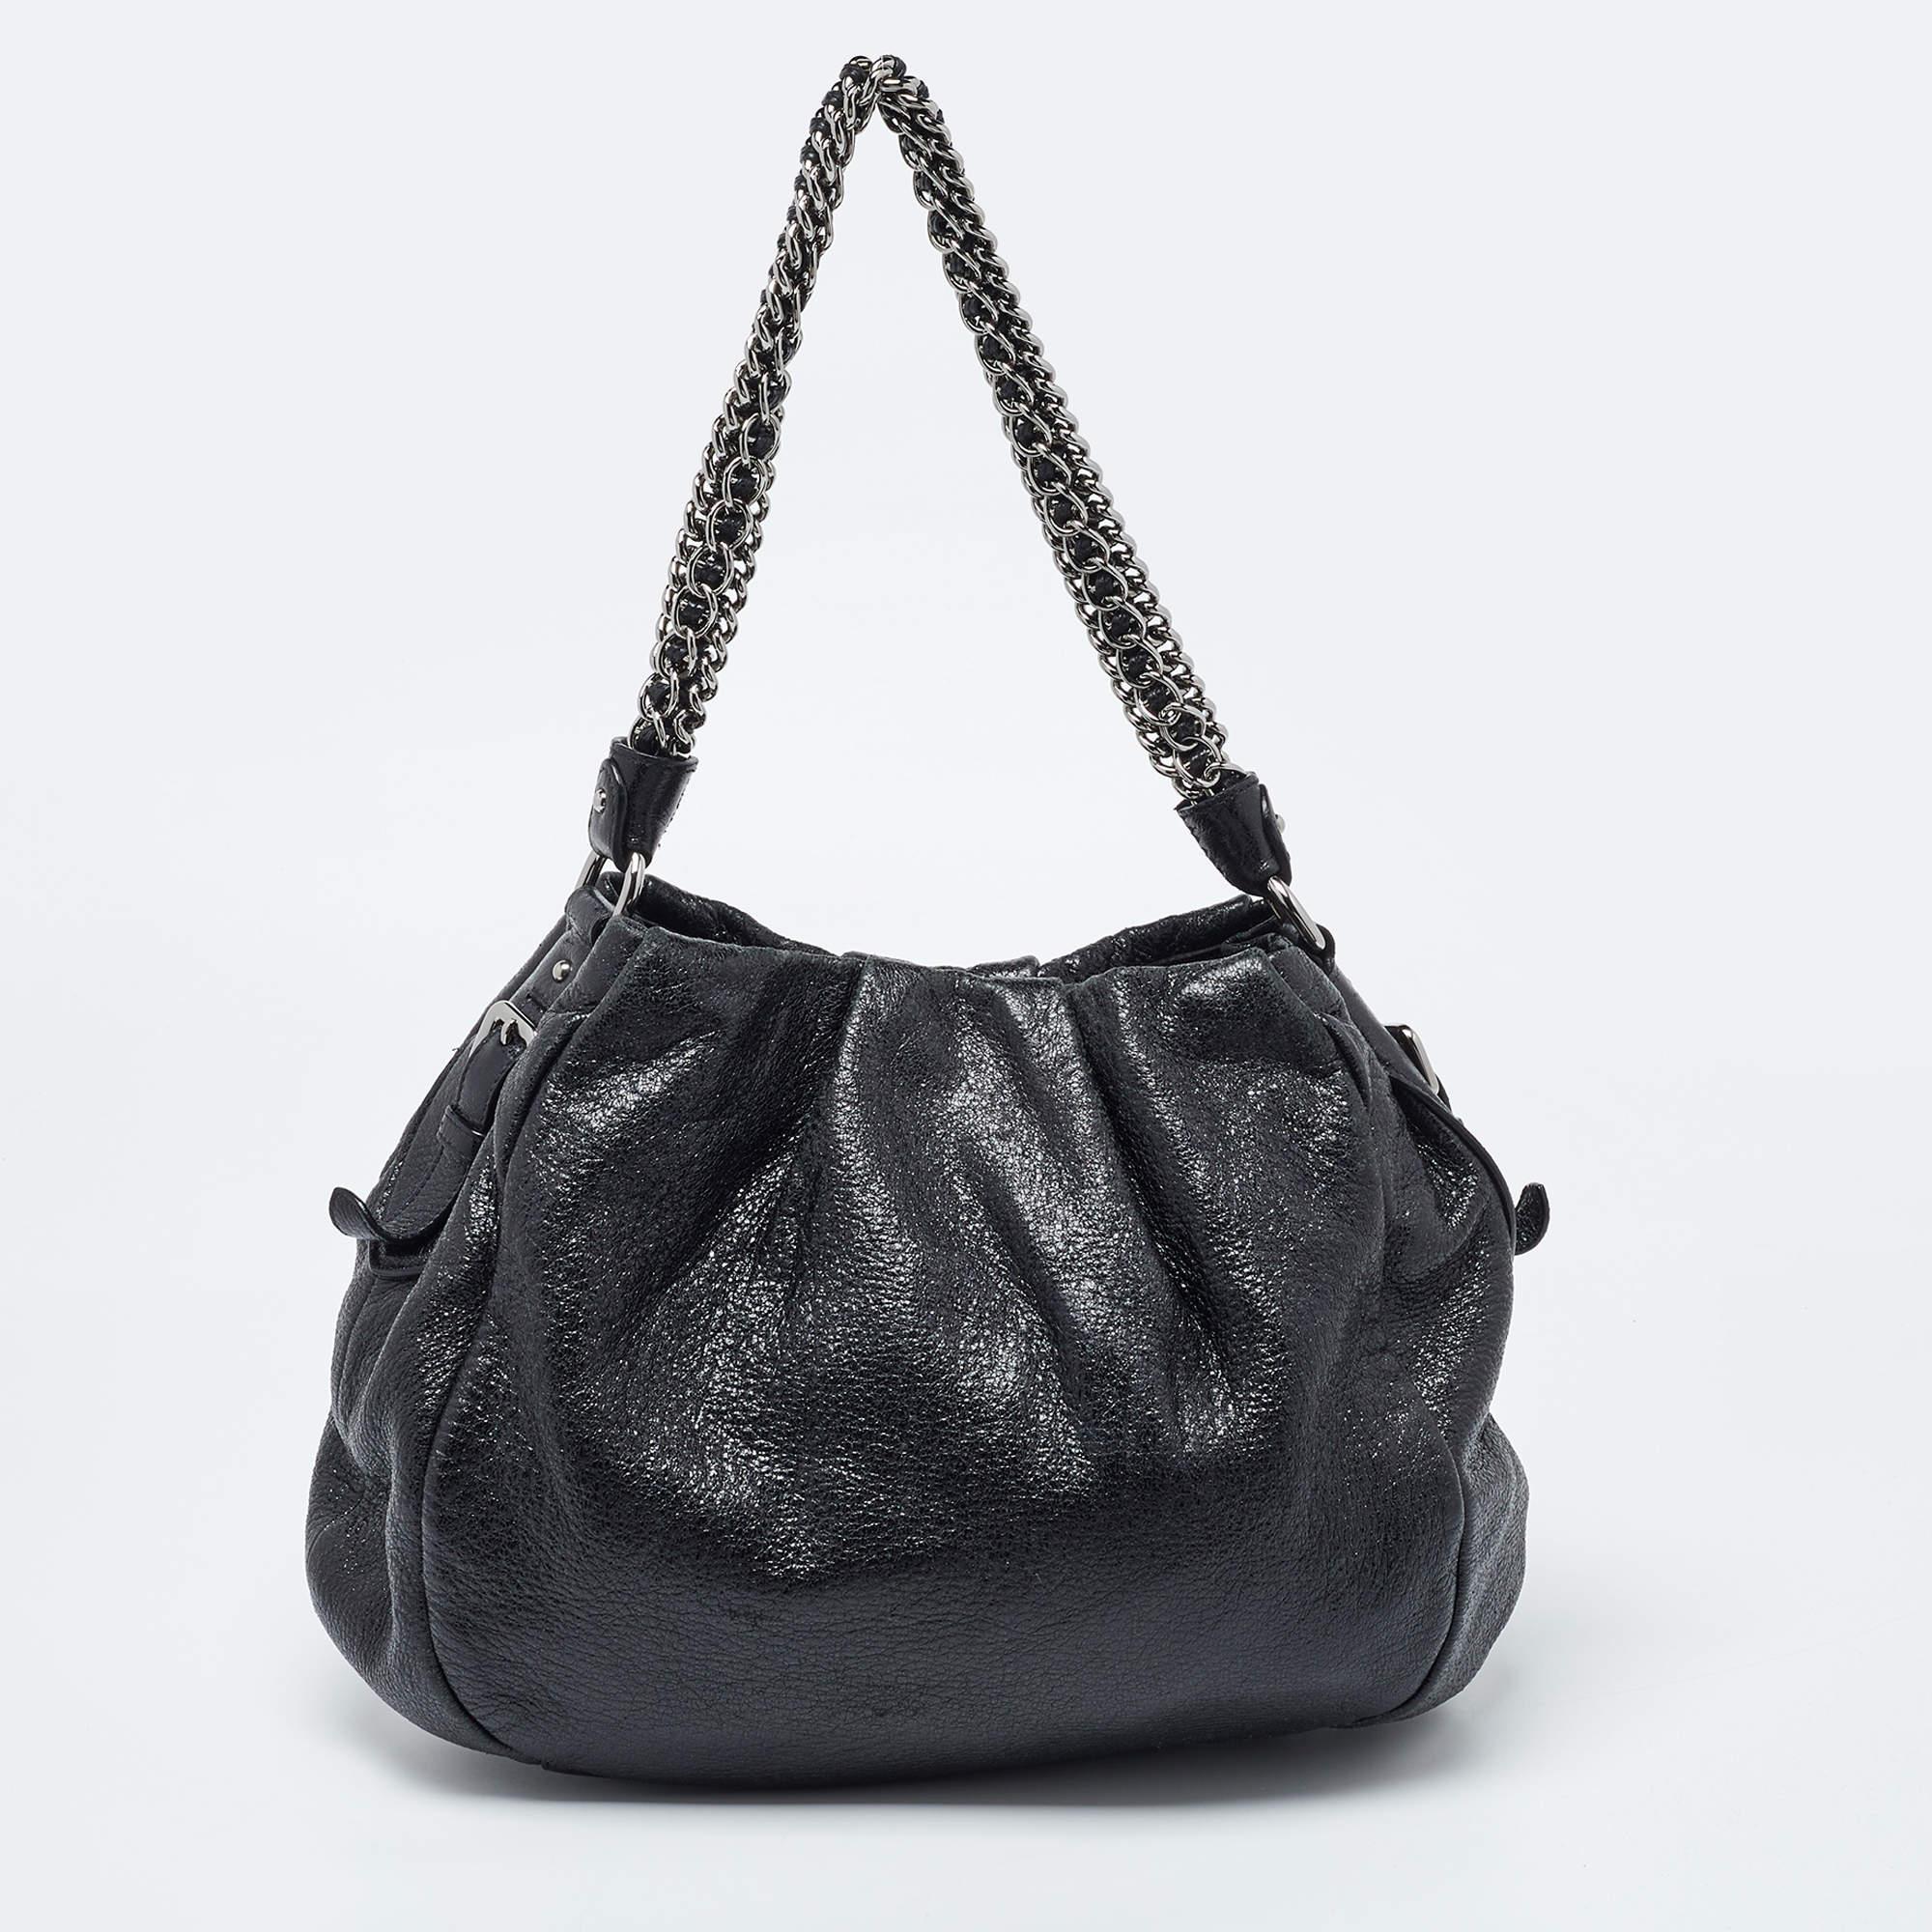 Stylish handbags never fail to make a fashionable impression. Make this designer hobo yours by pairing it with your sophisticated workwear as well as playful casual looks.

Includes: Original Dustbag